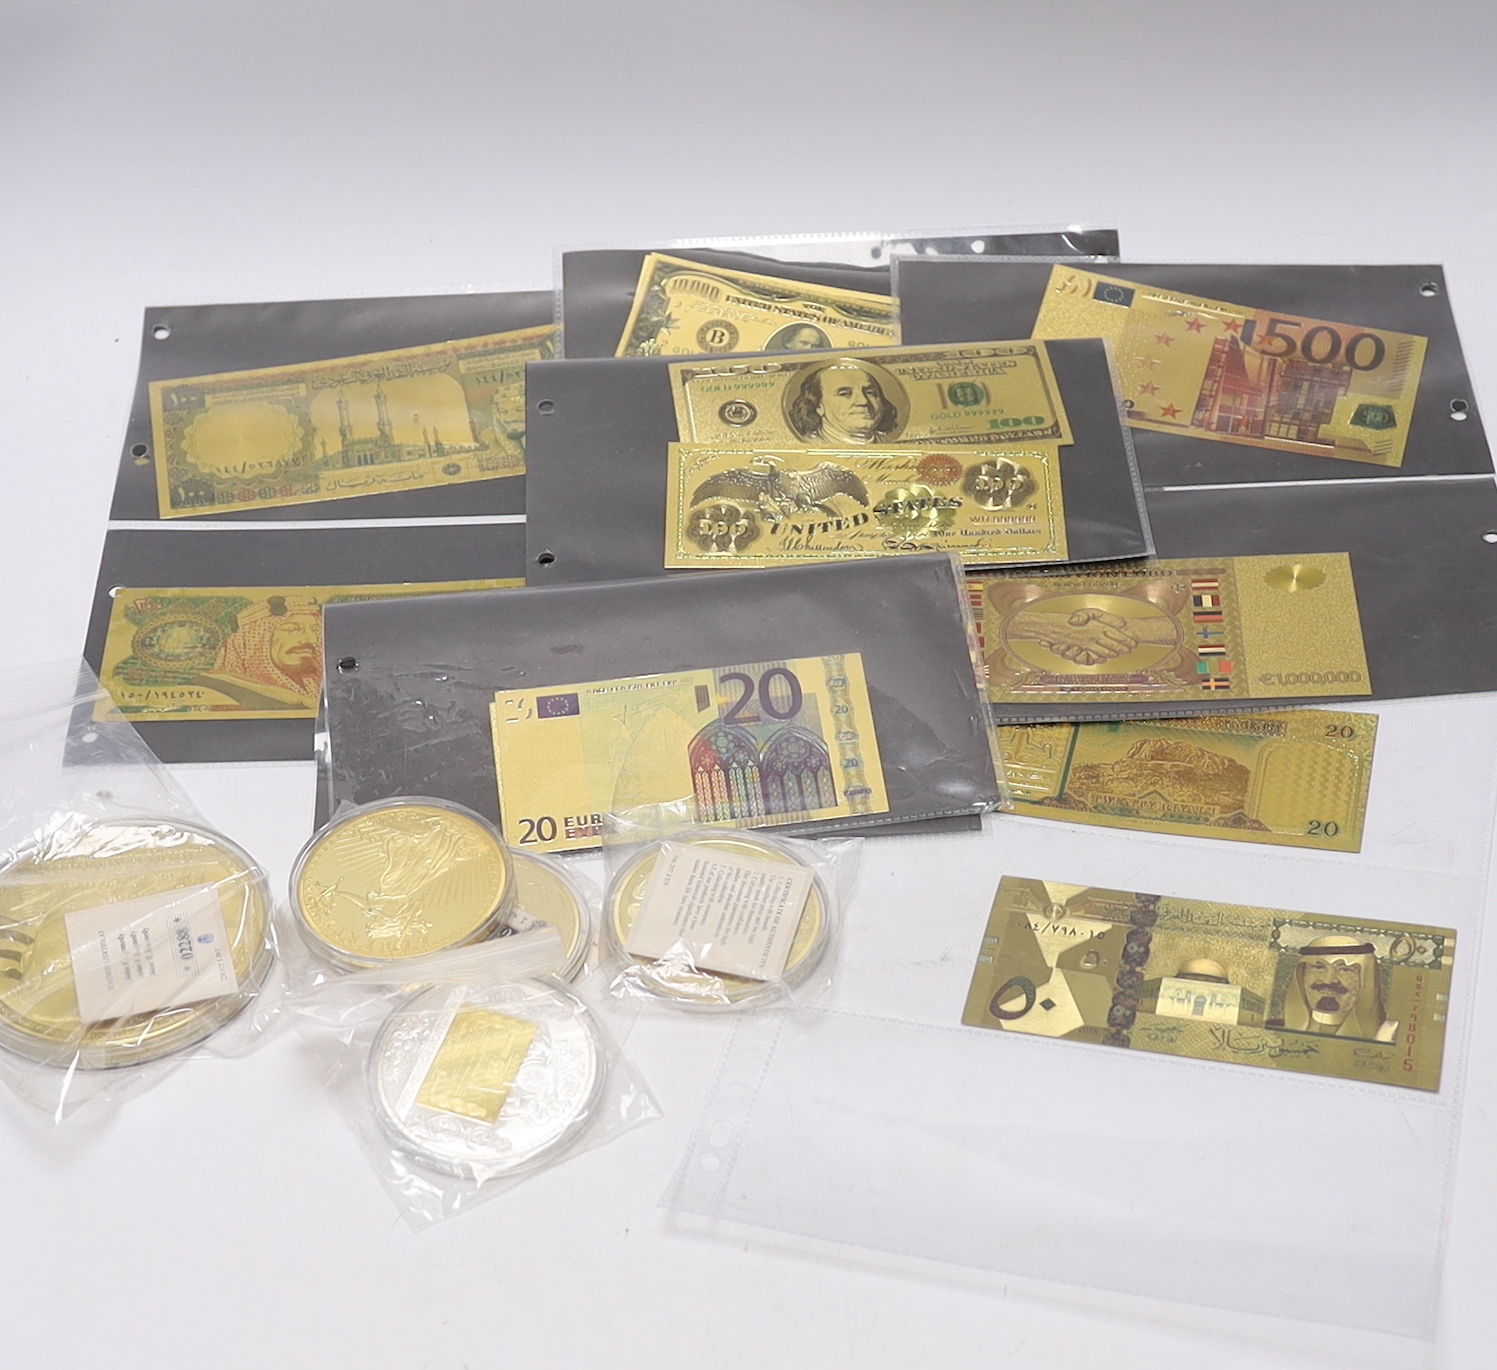 A collection of gold plated medallions and bank notes                                                                                                                                                                       